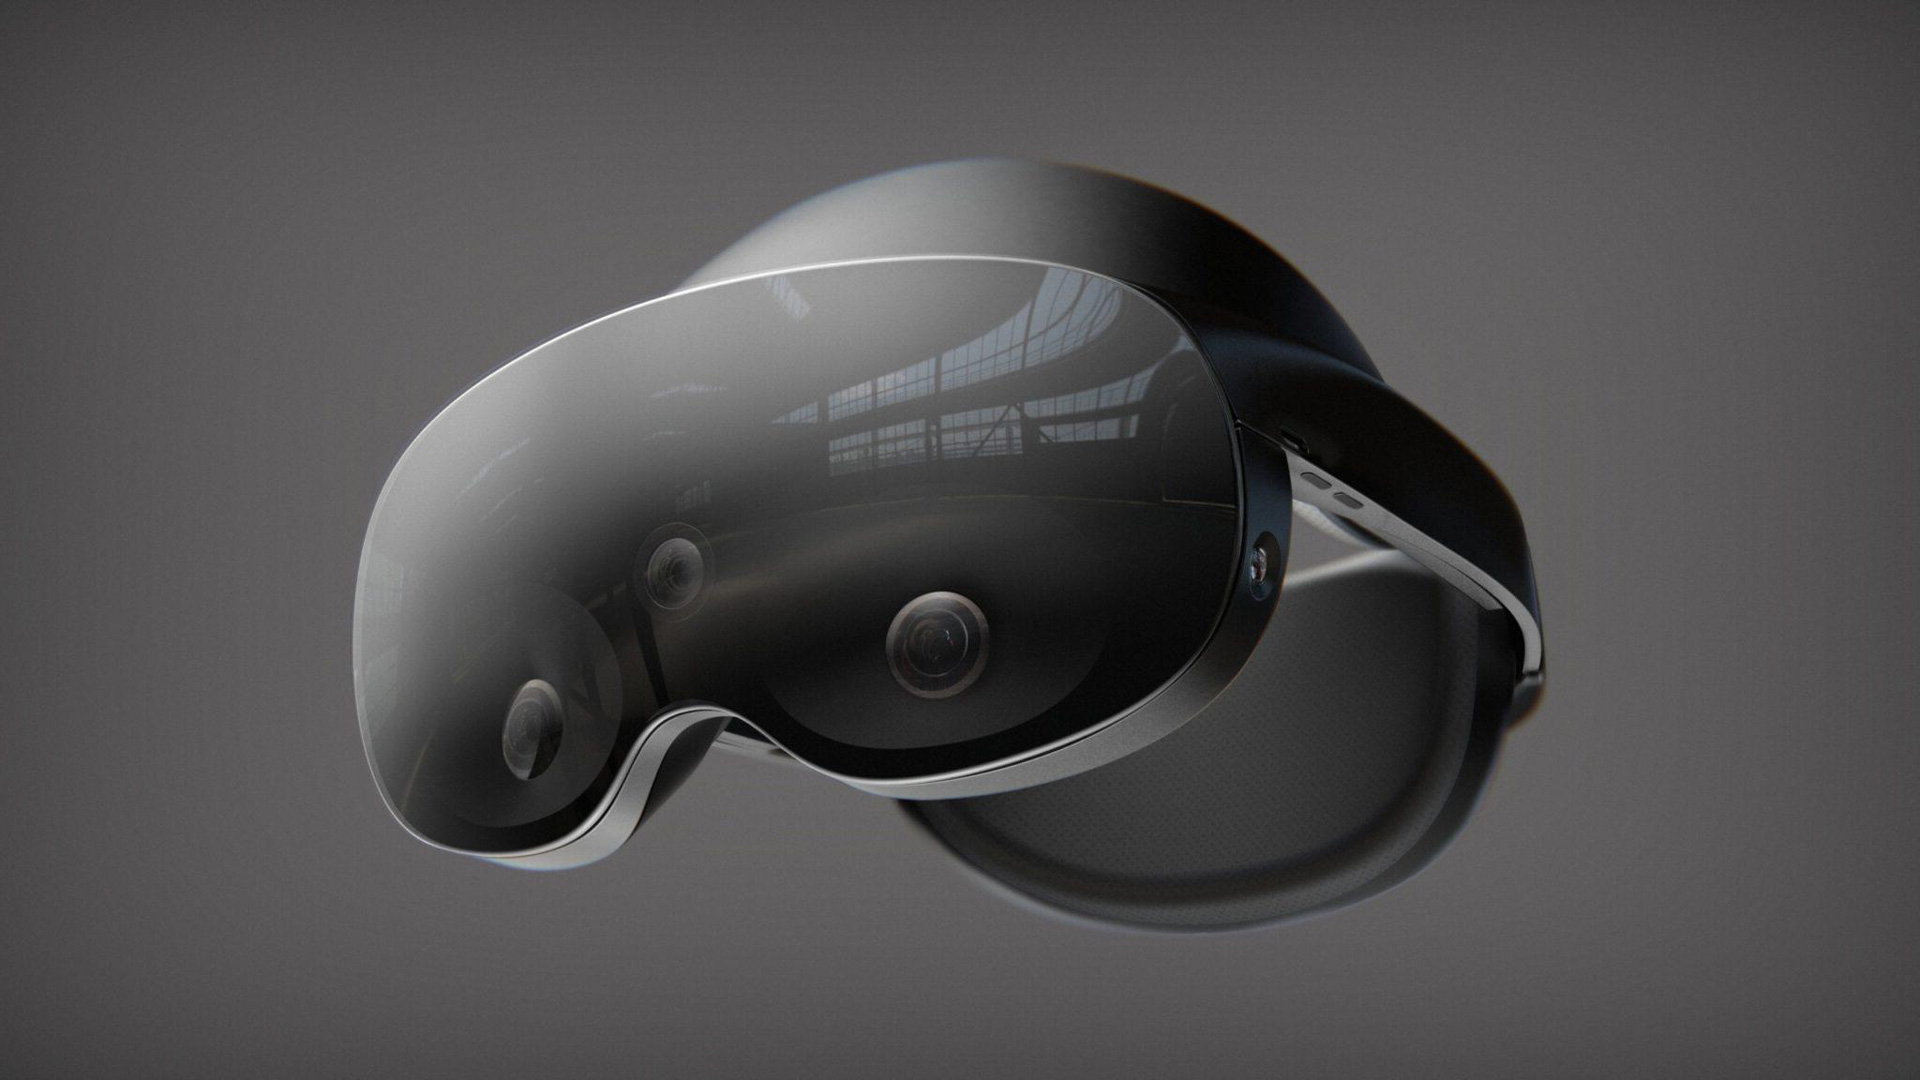 It was announced that the Meta VR headset will be introduced.